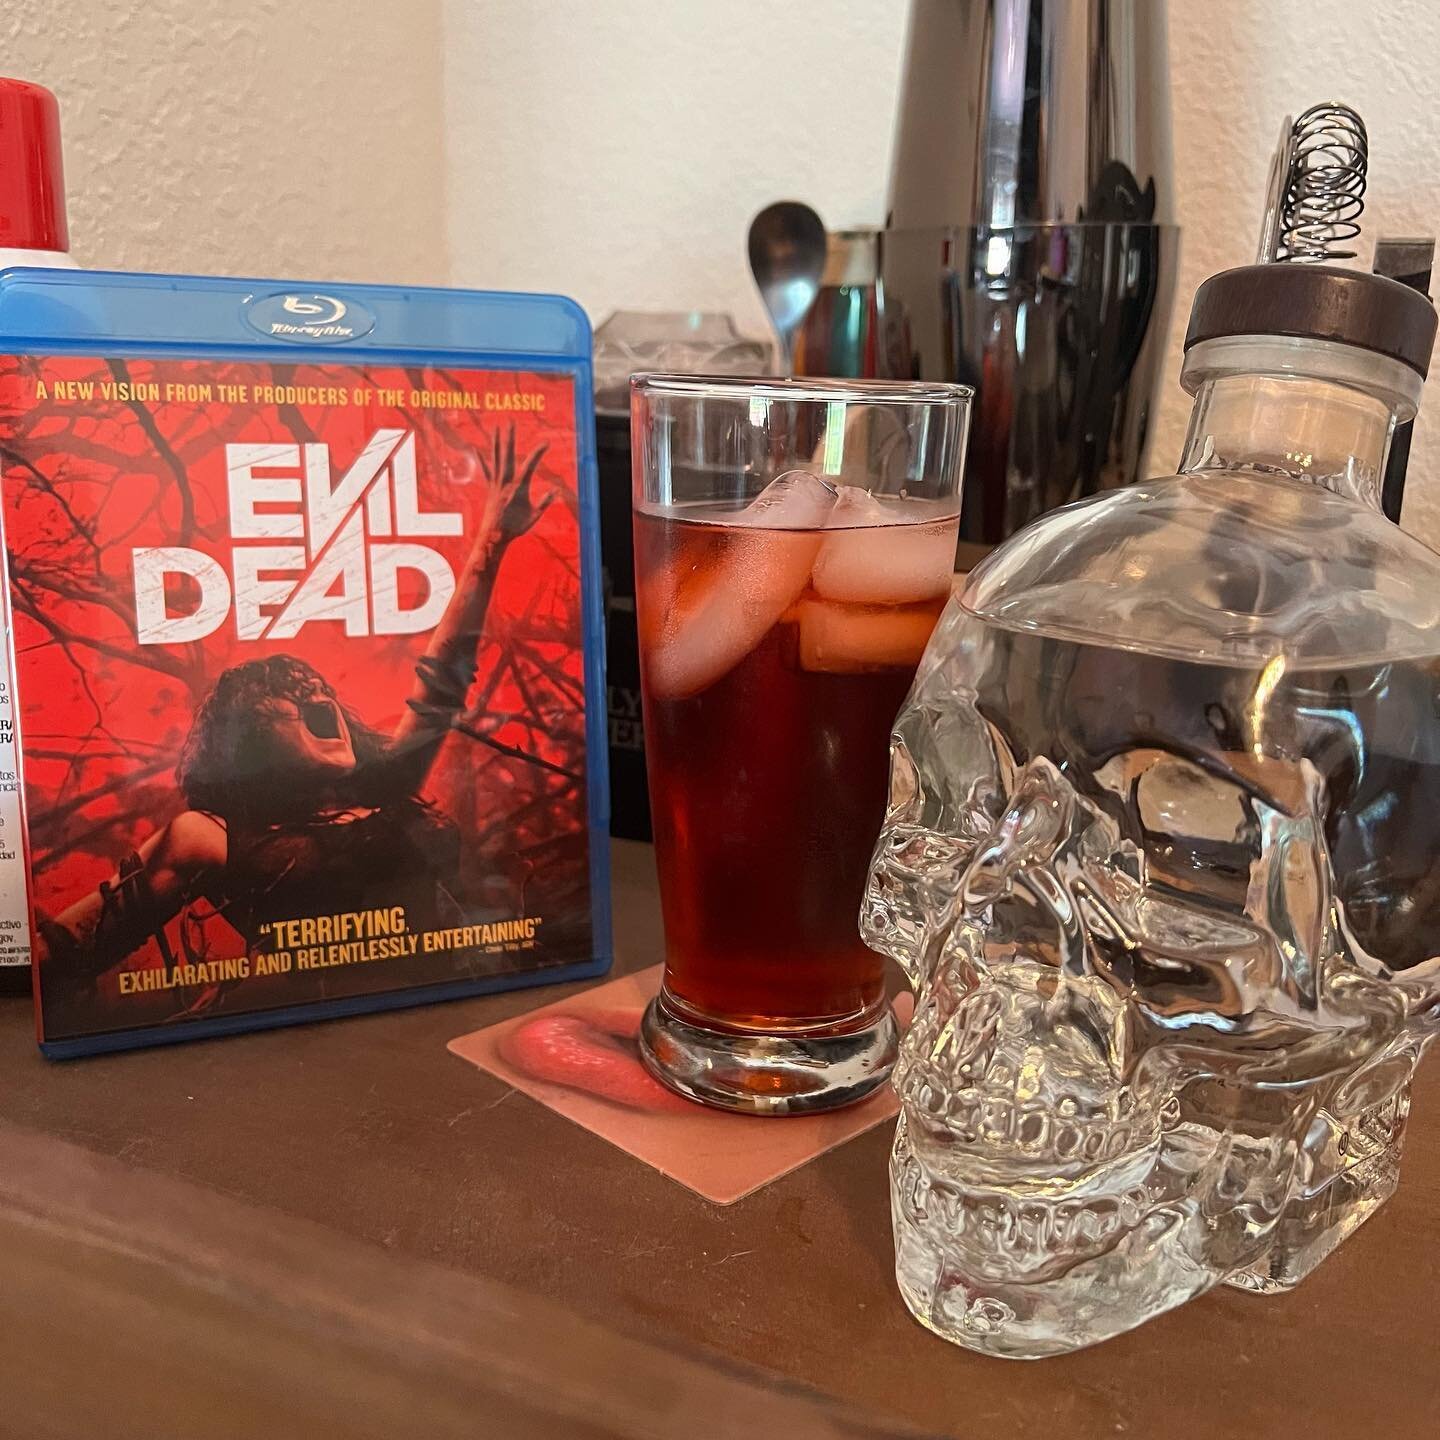 4th of July is cancelled, today is officially Halloween 2.

Evil Dead and a Bloodbath.
&bull;2.5oz Vodka
&bull;2oz Campari
&bull;.5oz triple sec
&bull;Splash of grenadine
&bull;Splash of simple syrup
&bull;Top with cola